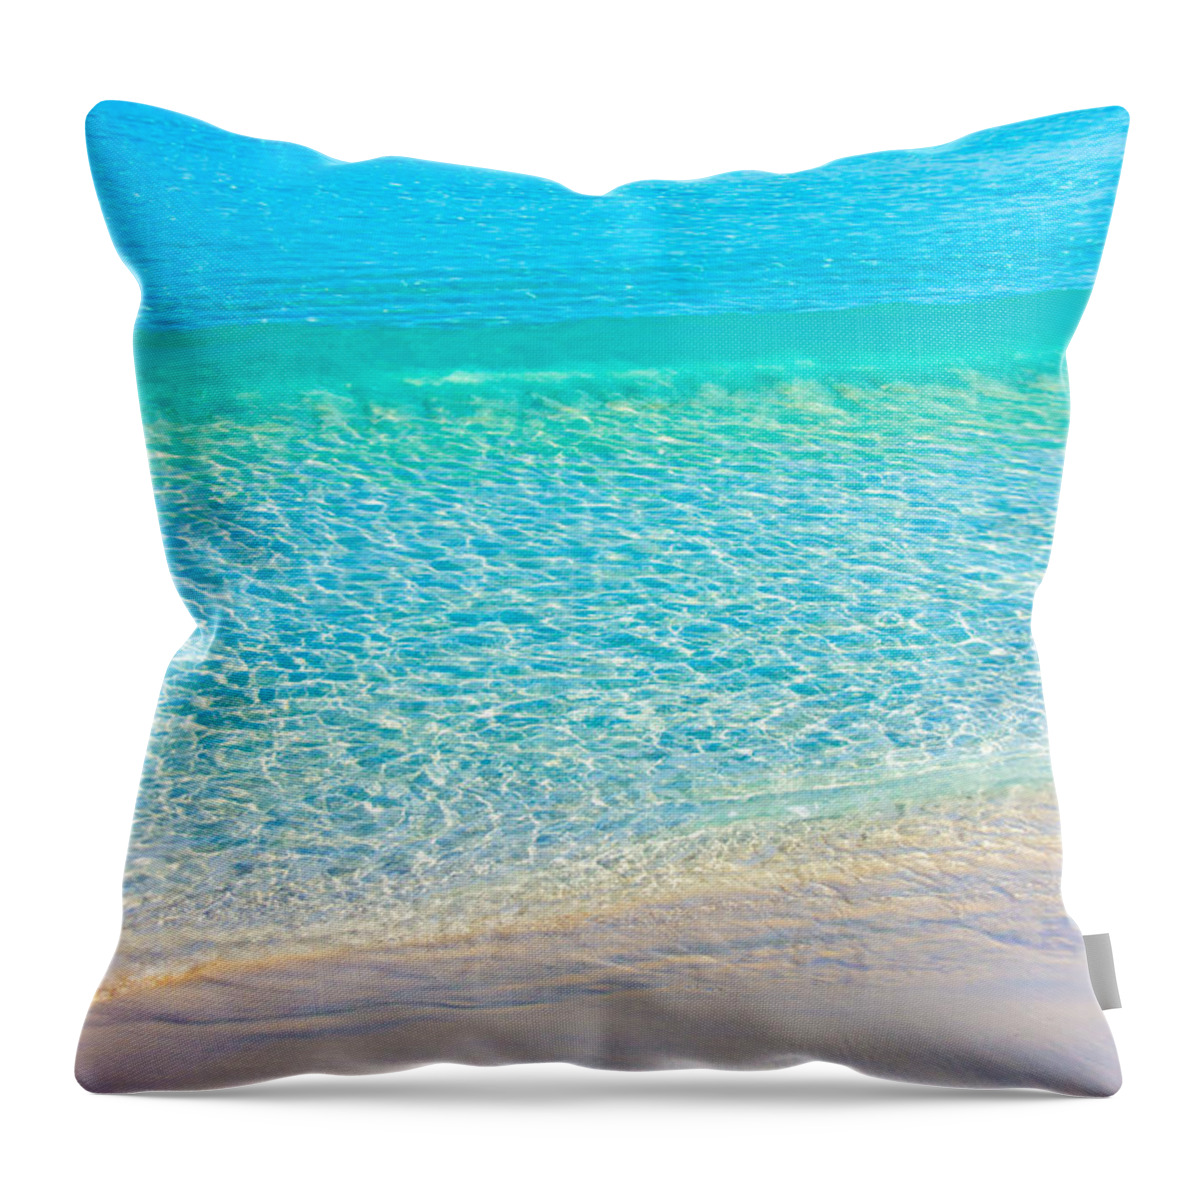 Blue Throw Pillow featuring the photograph Keep Calm and Listen to the Sea by Kris Hiemstra